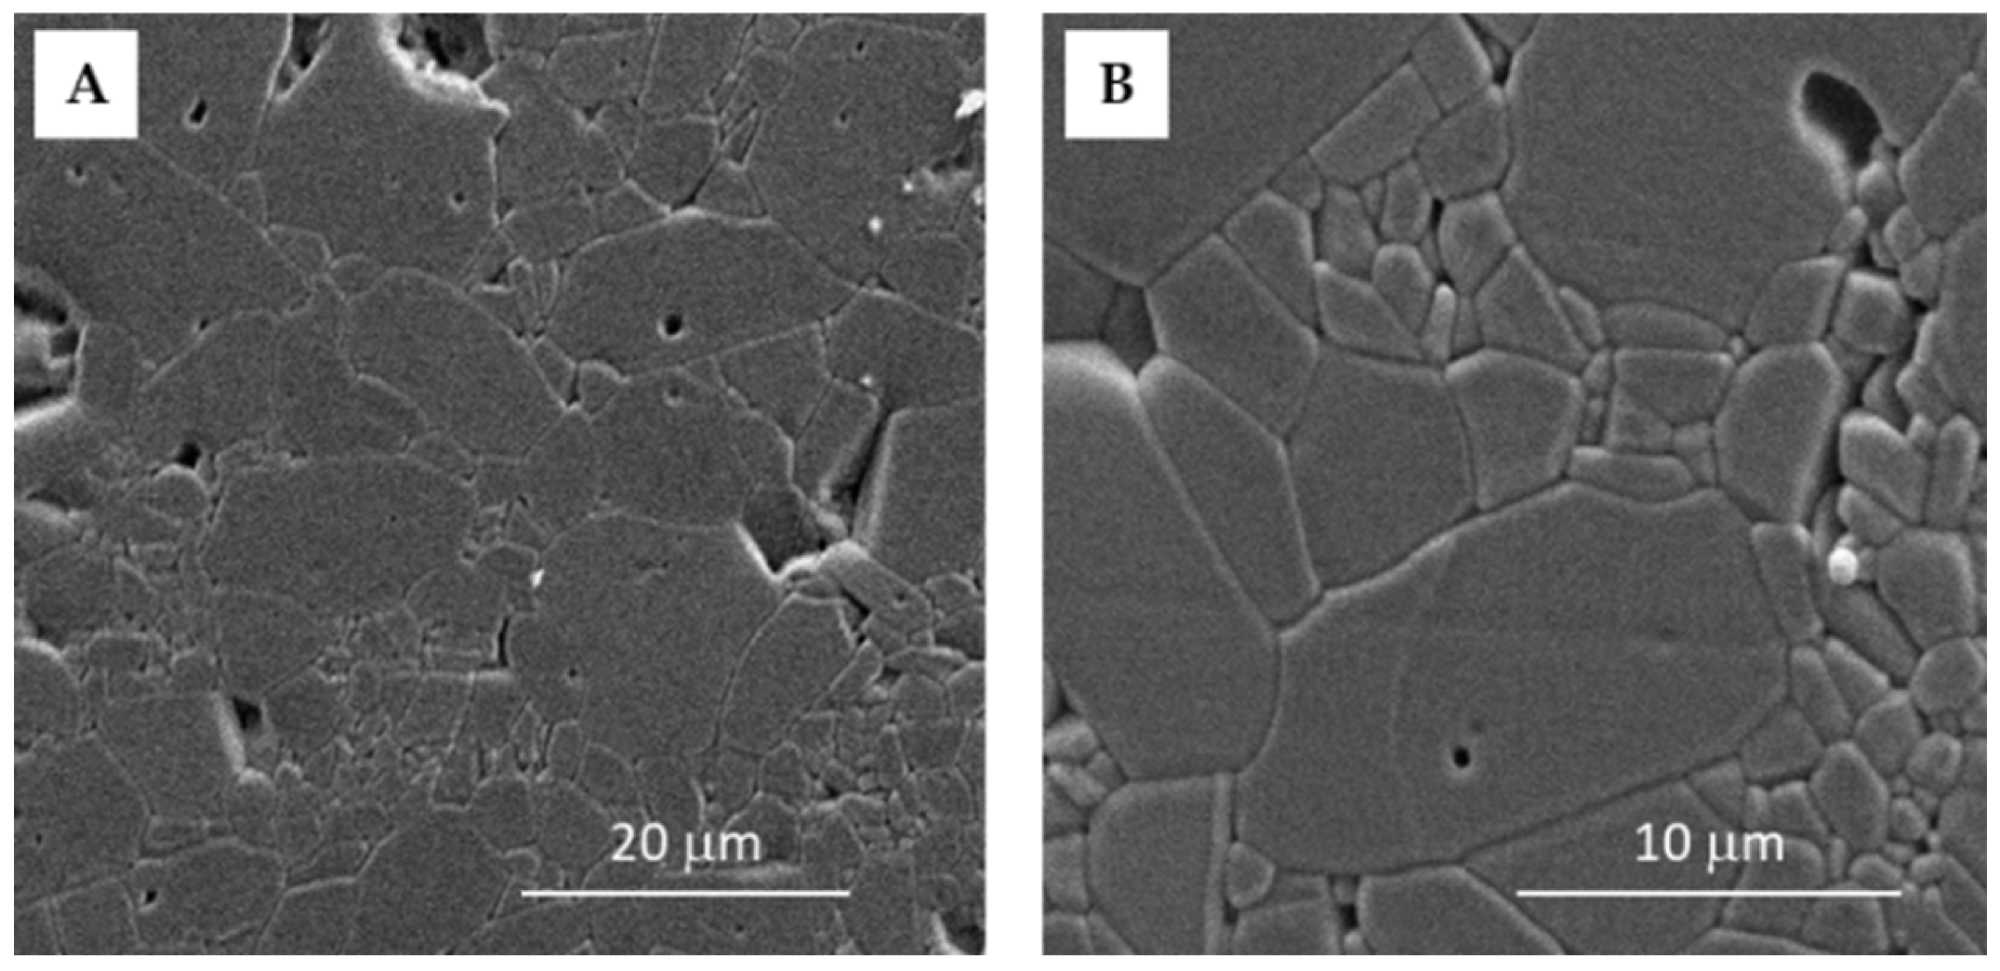 SEM images of the sintered Al2O3 ceramics with the magnification of (A) 2500× and (B) 6000×.